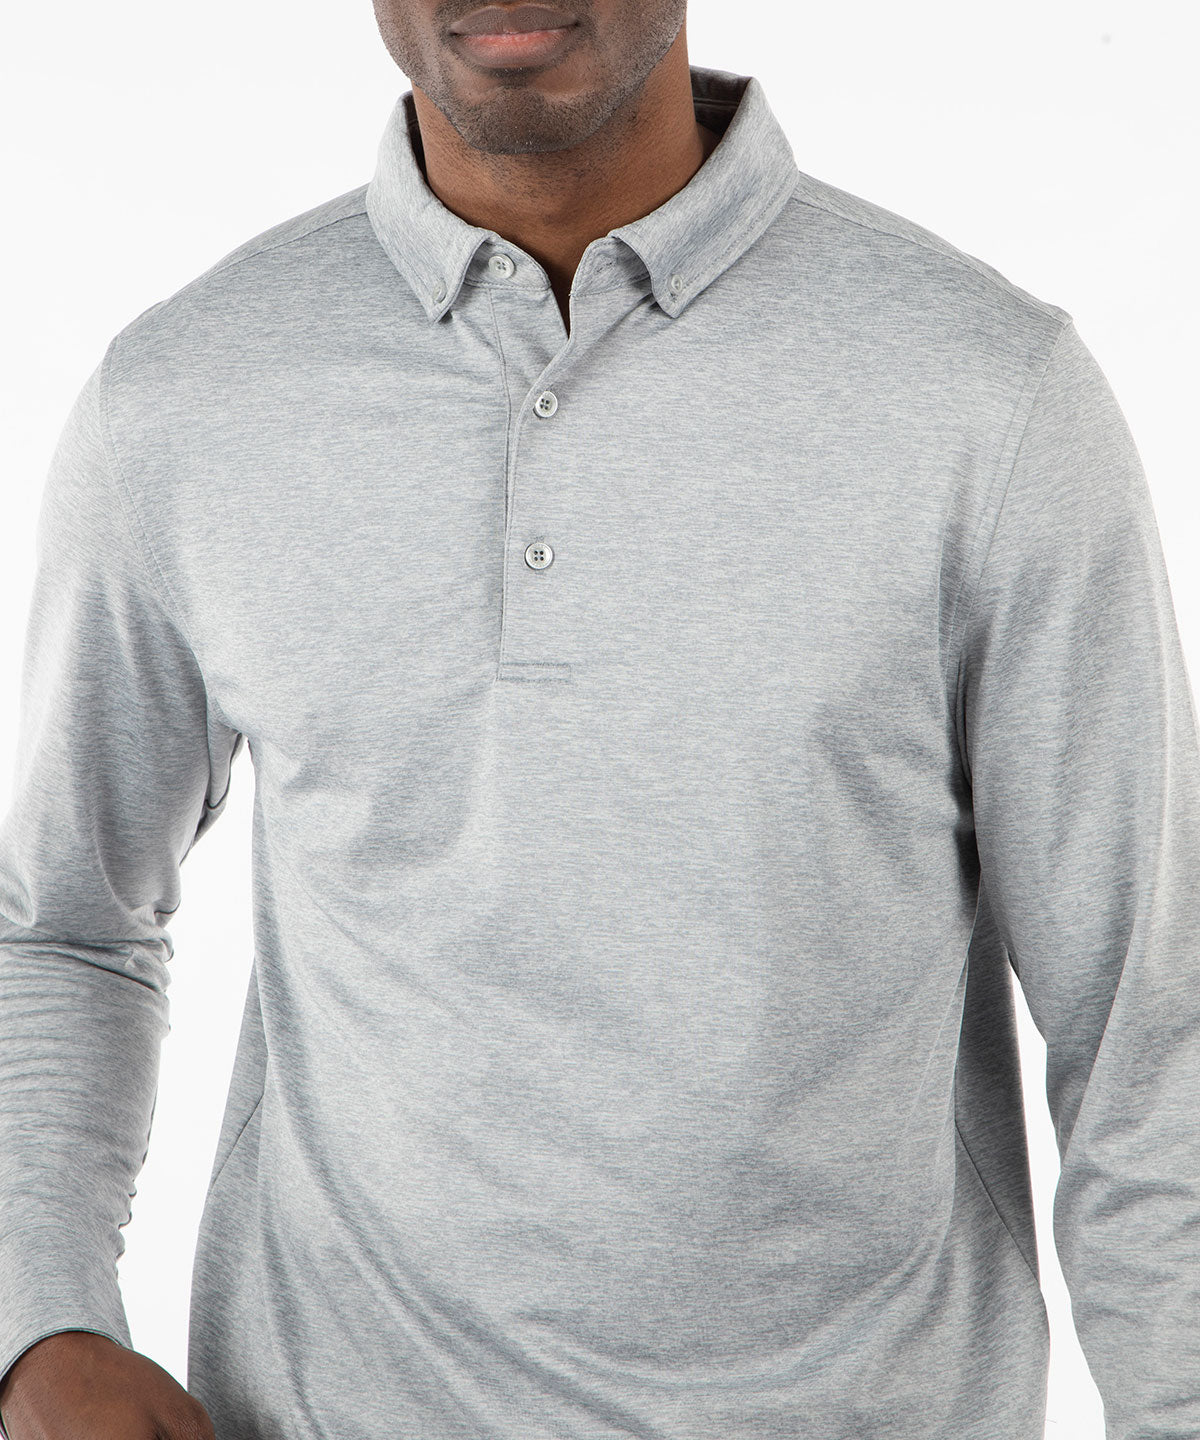 Performance Brushed Poly-Flannel Stretch Jersey Polo with Button Cuff